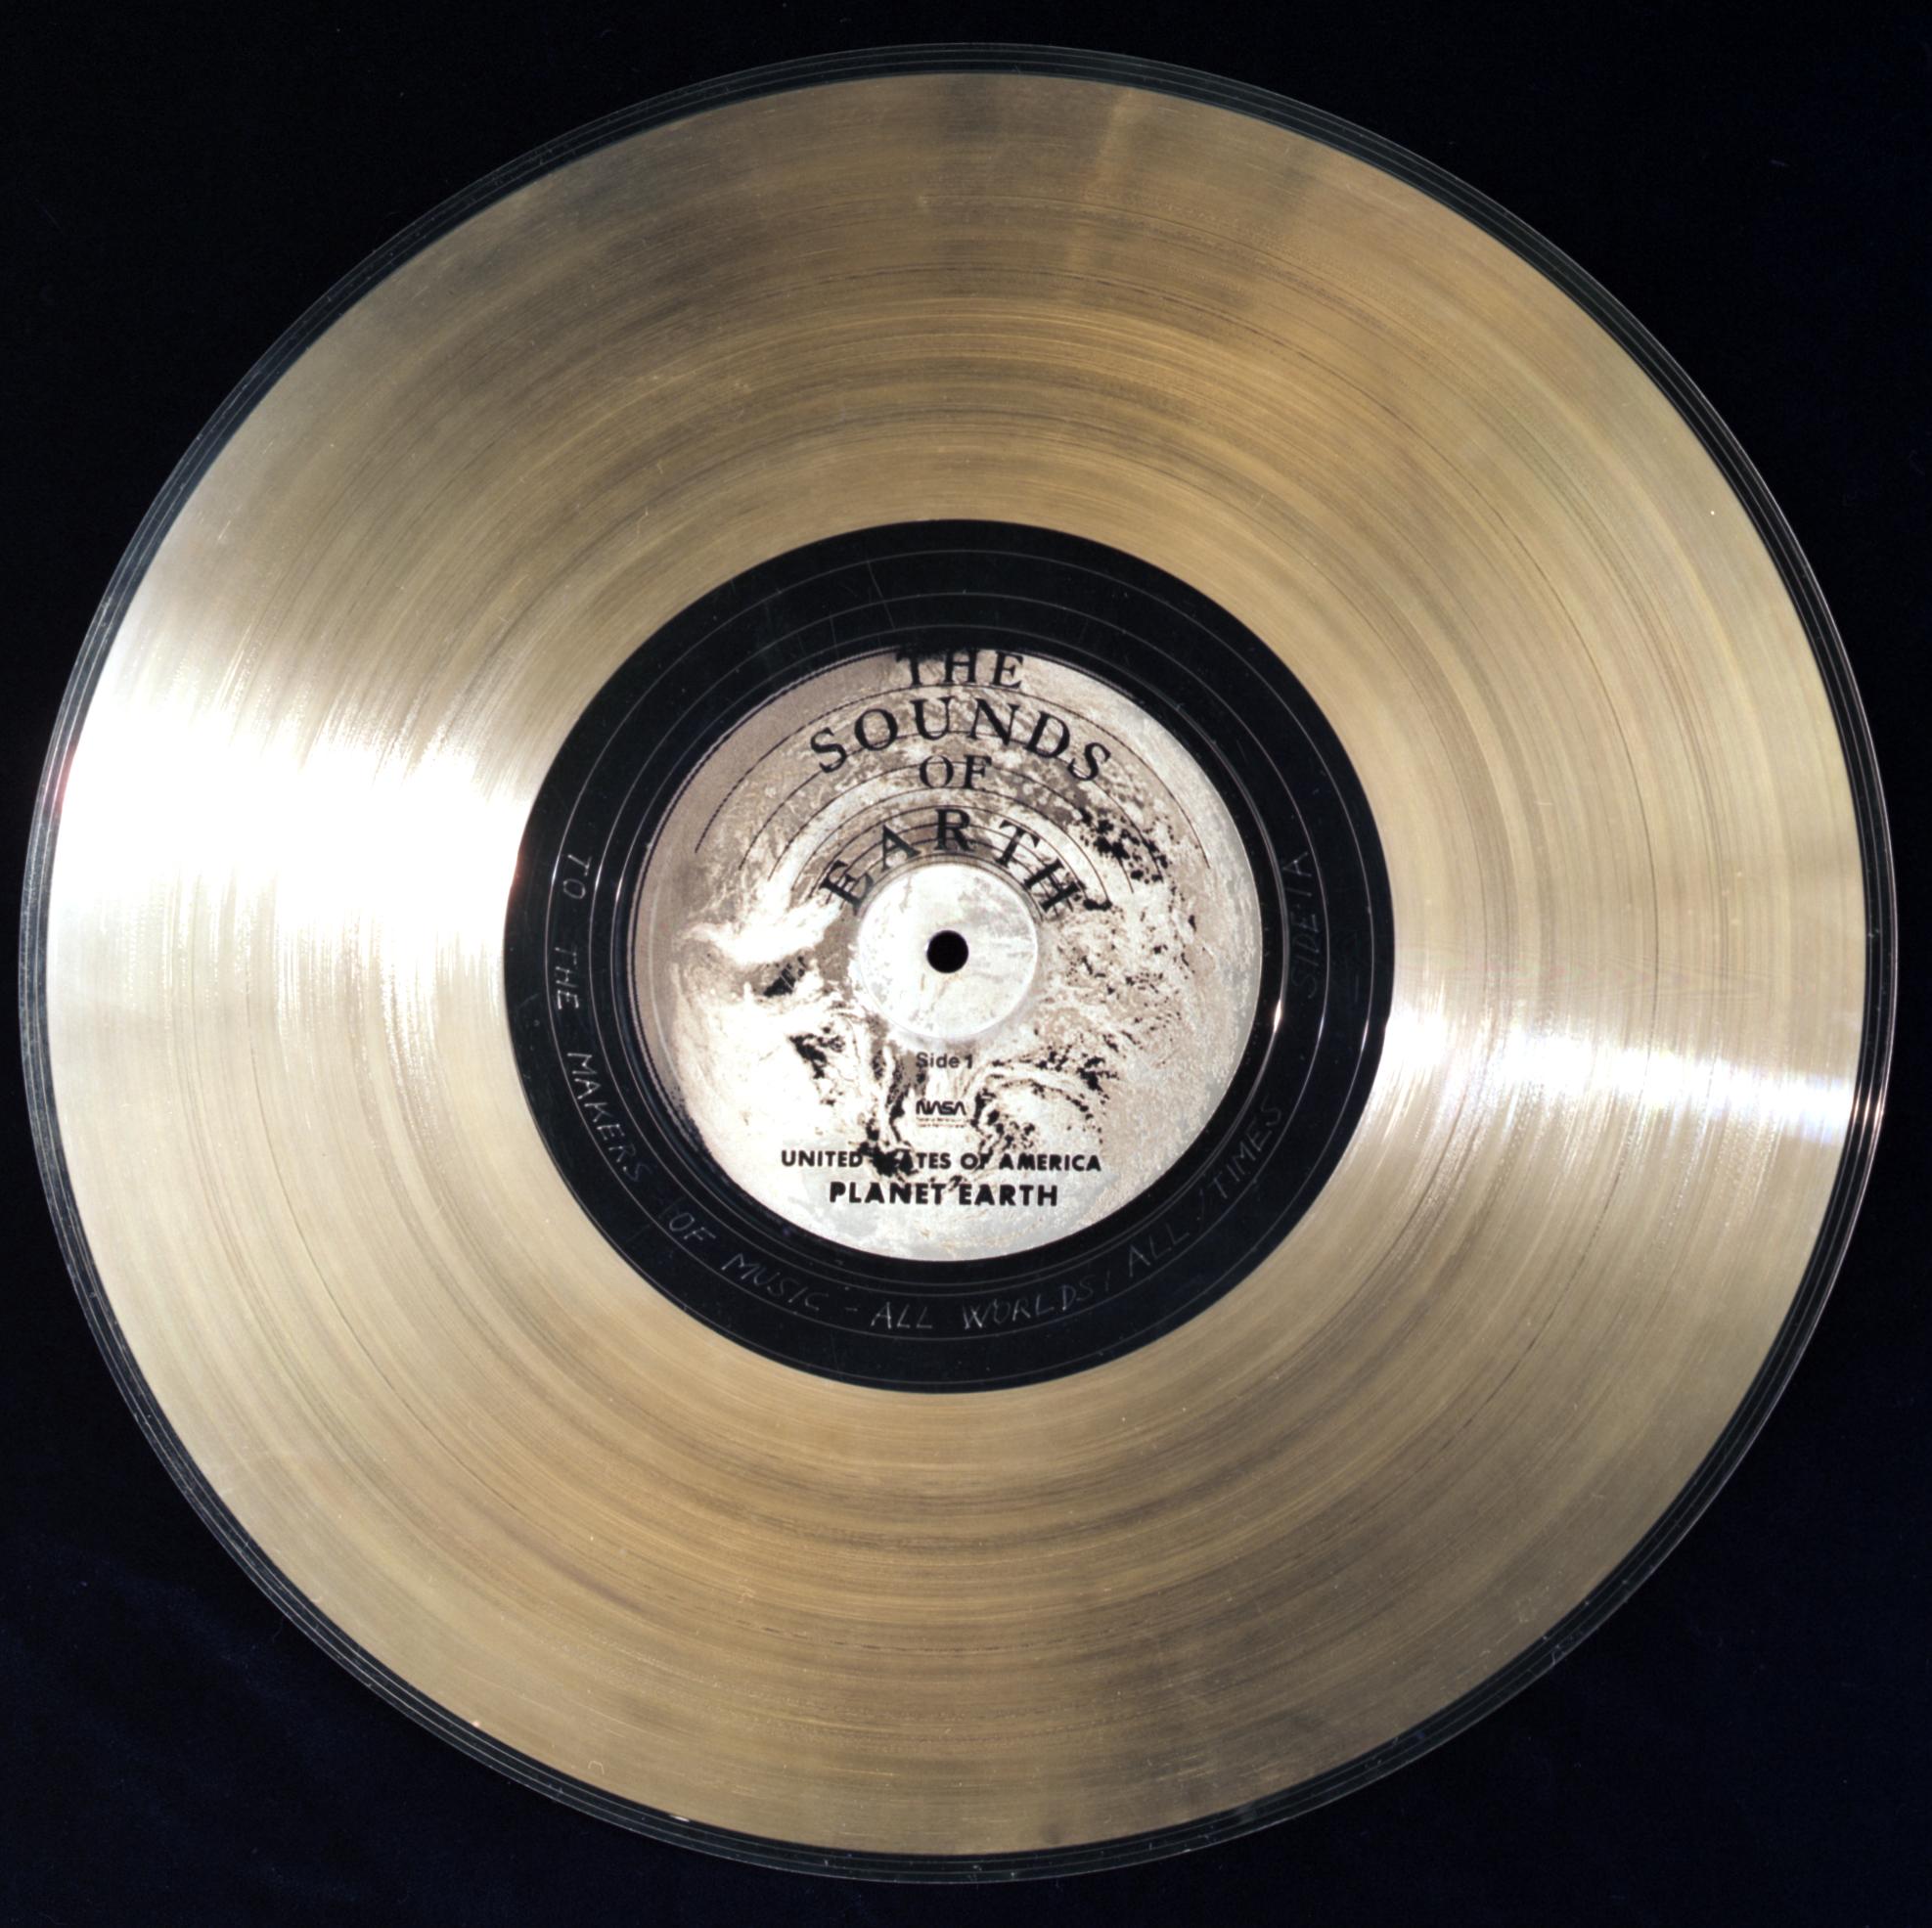 A close up of the golden record. The label says "To the makers of music - all worlds, all times."